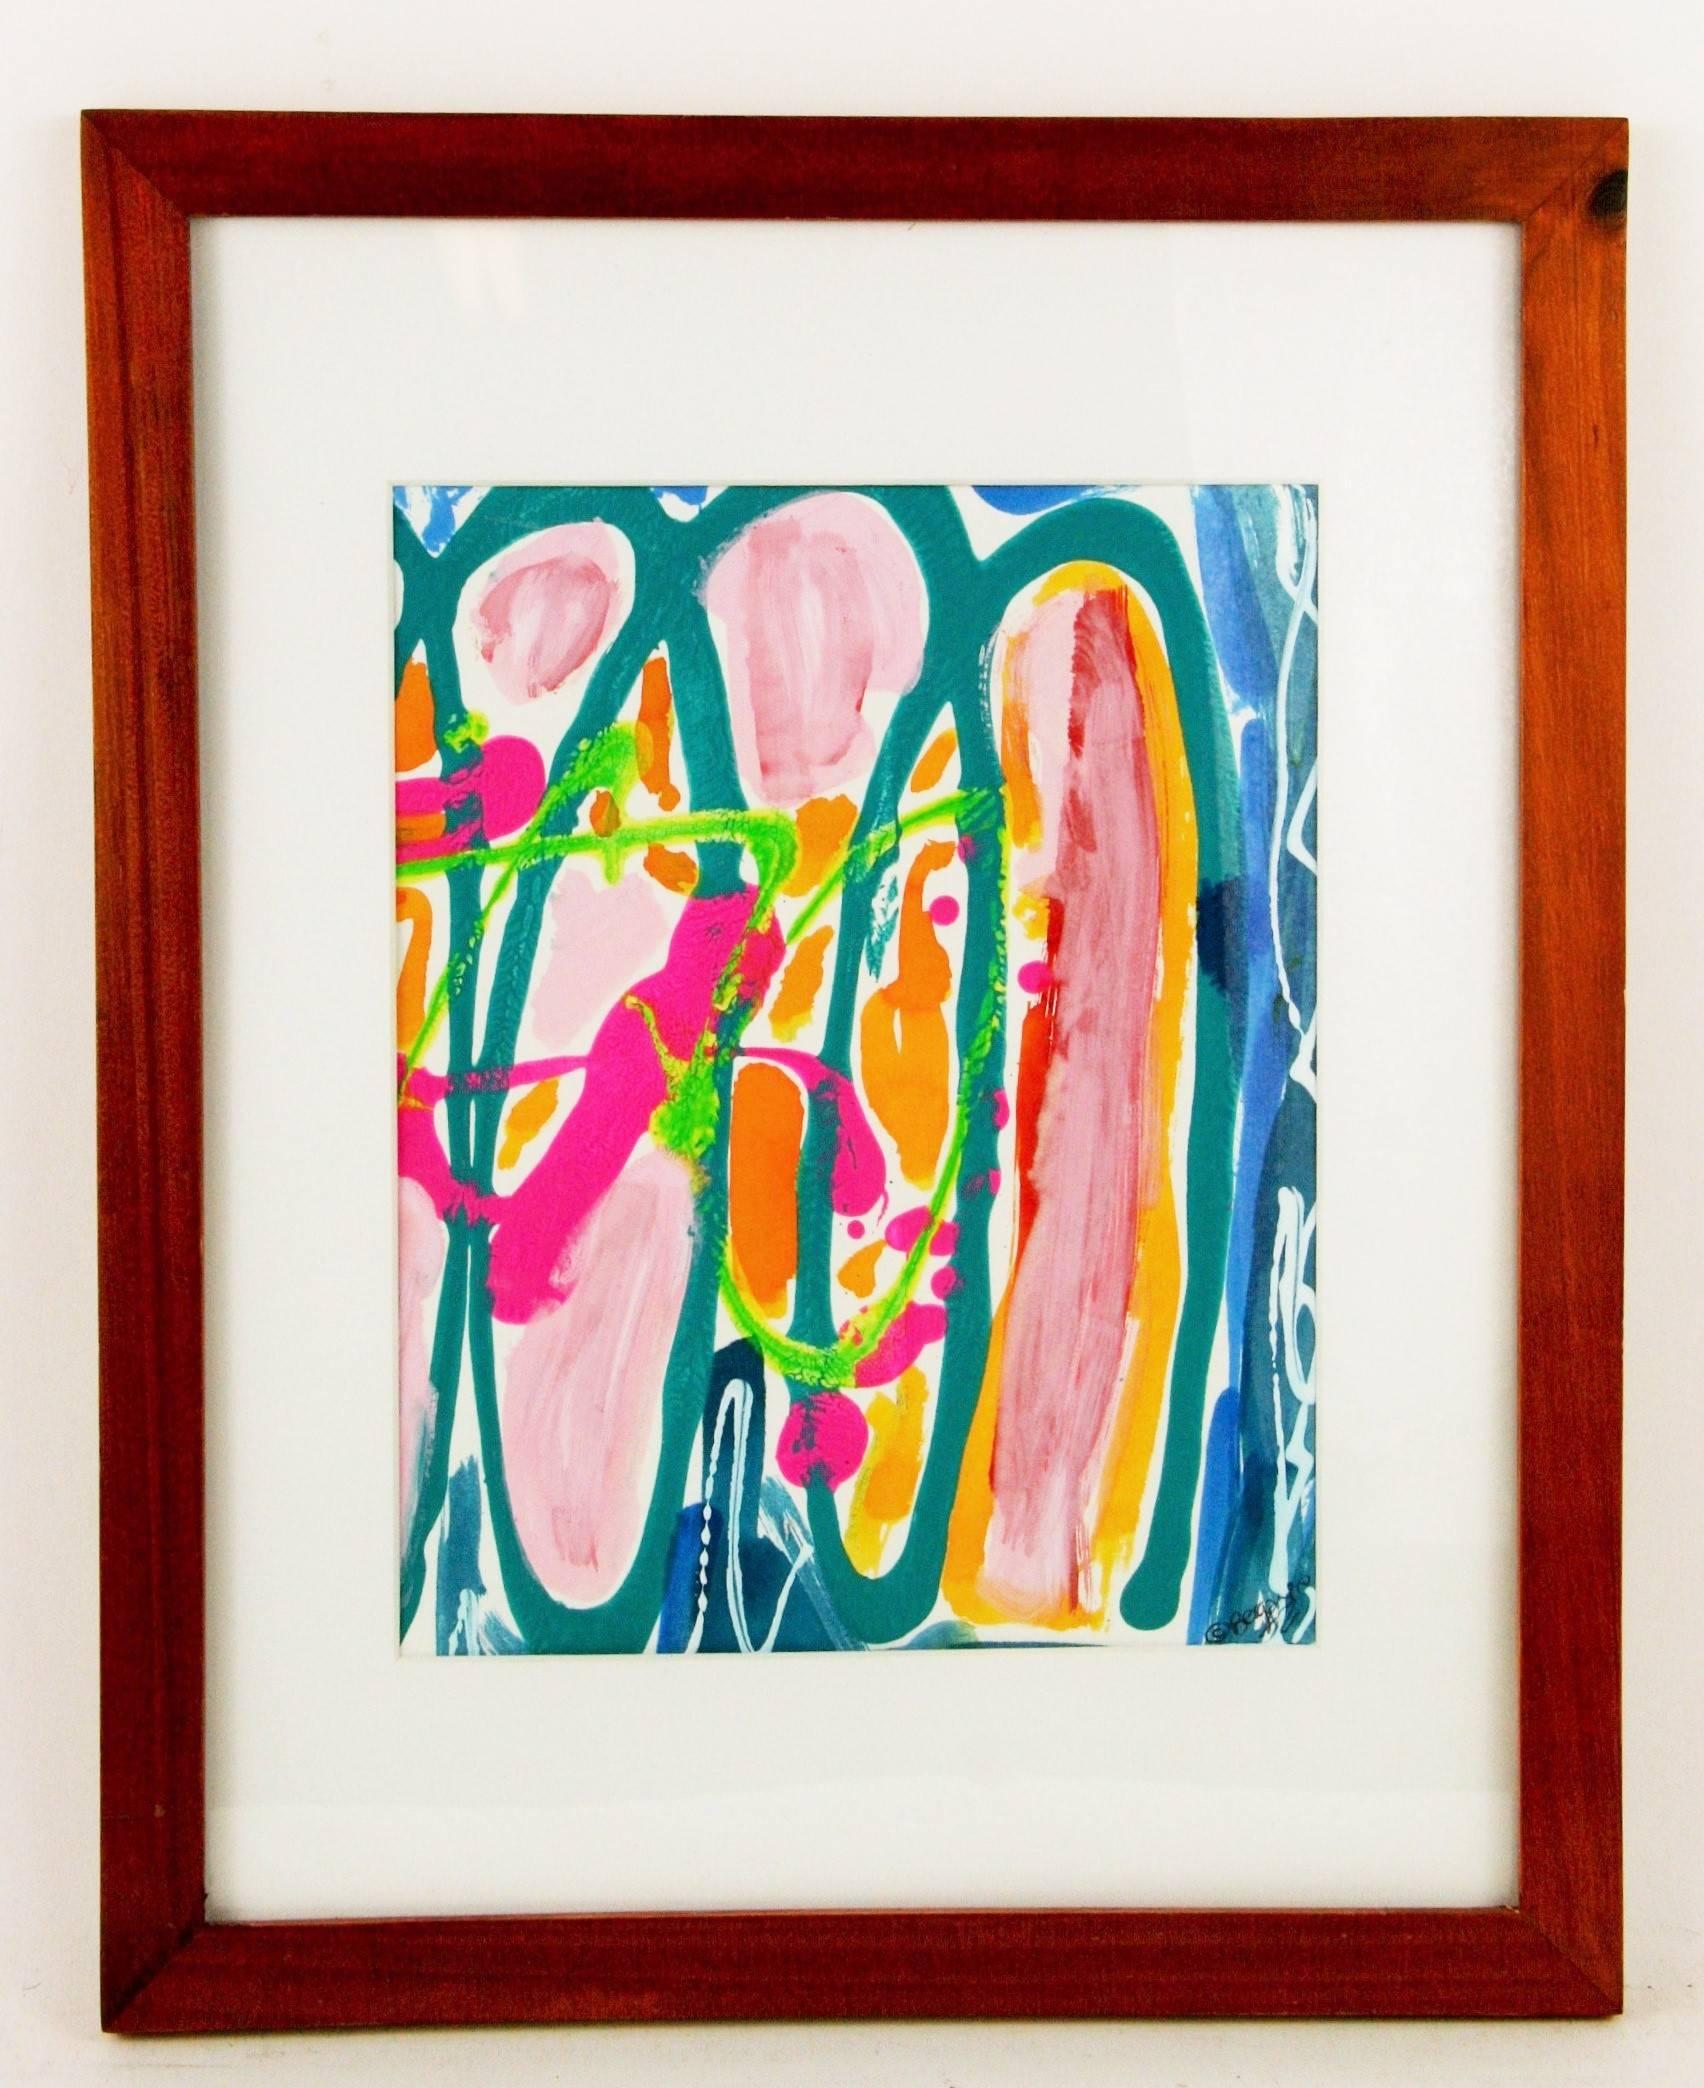 Gouache on paper under glass in wood frame Image size 7.5x9.5